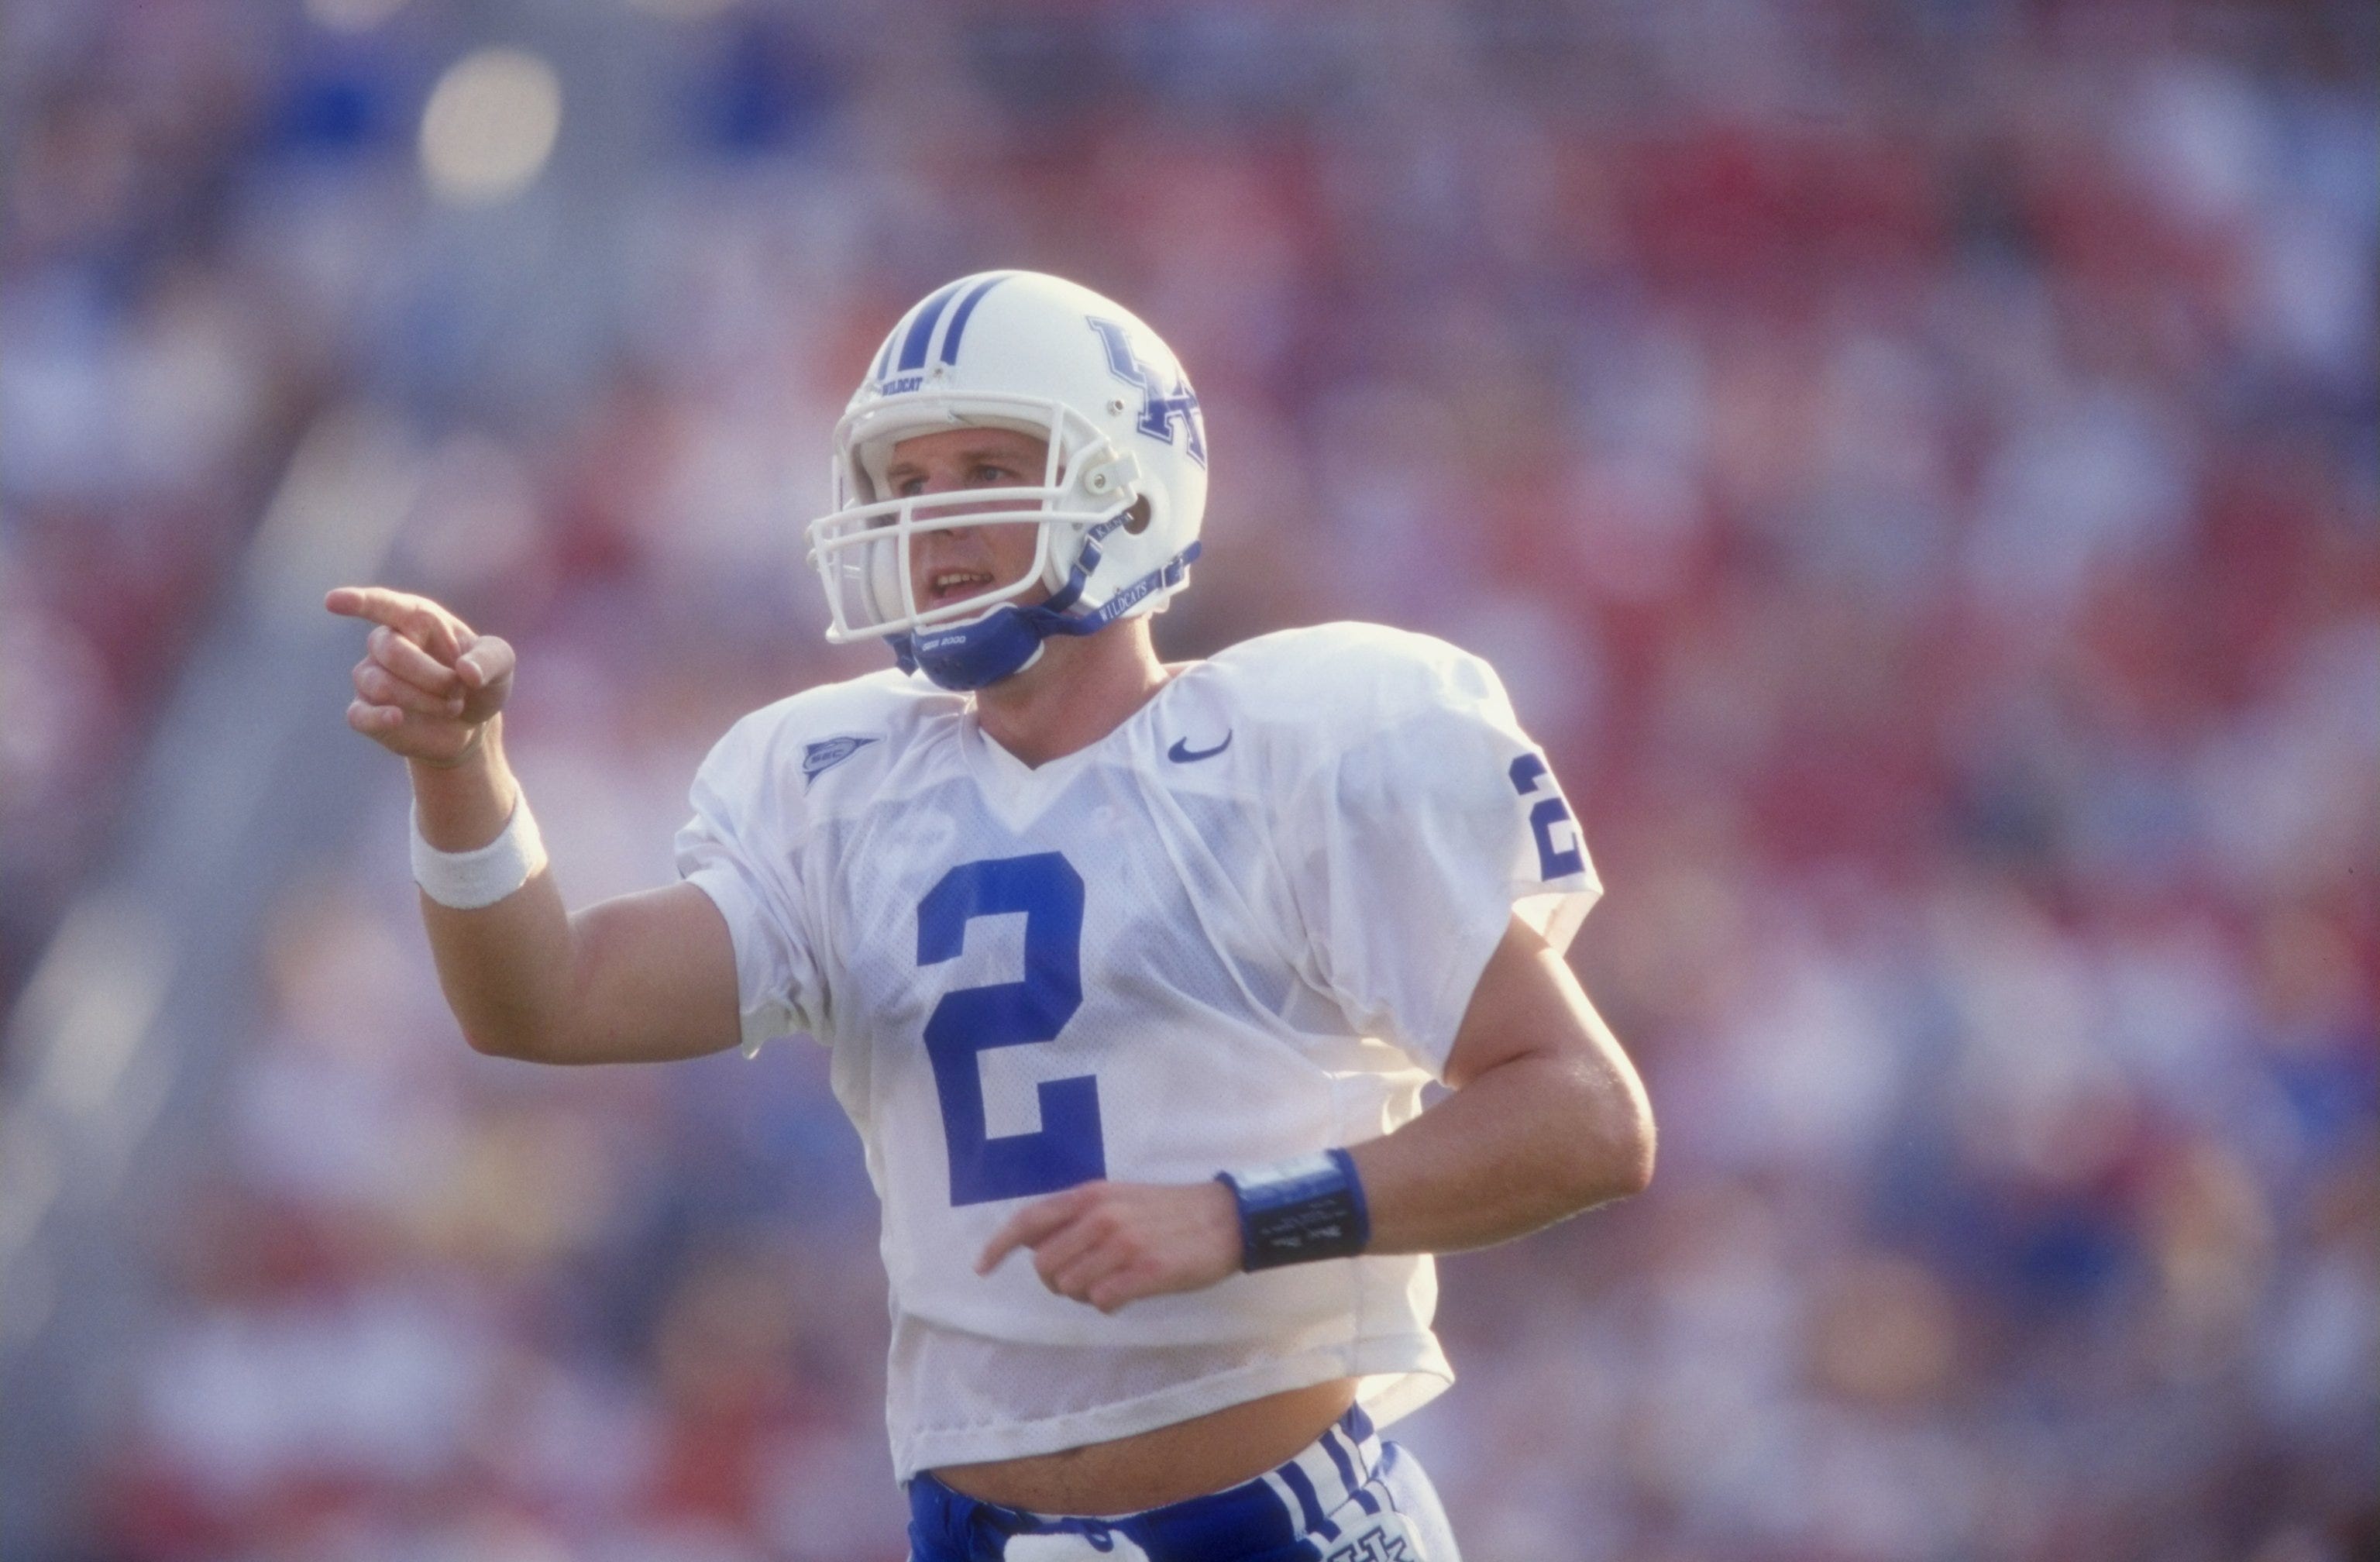 Tim Couch inducted National High School Hall of Fame